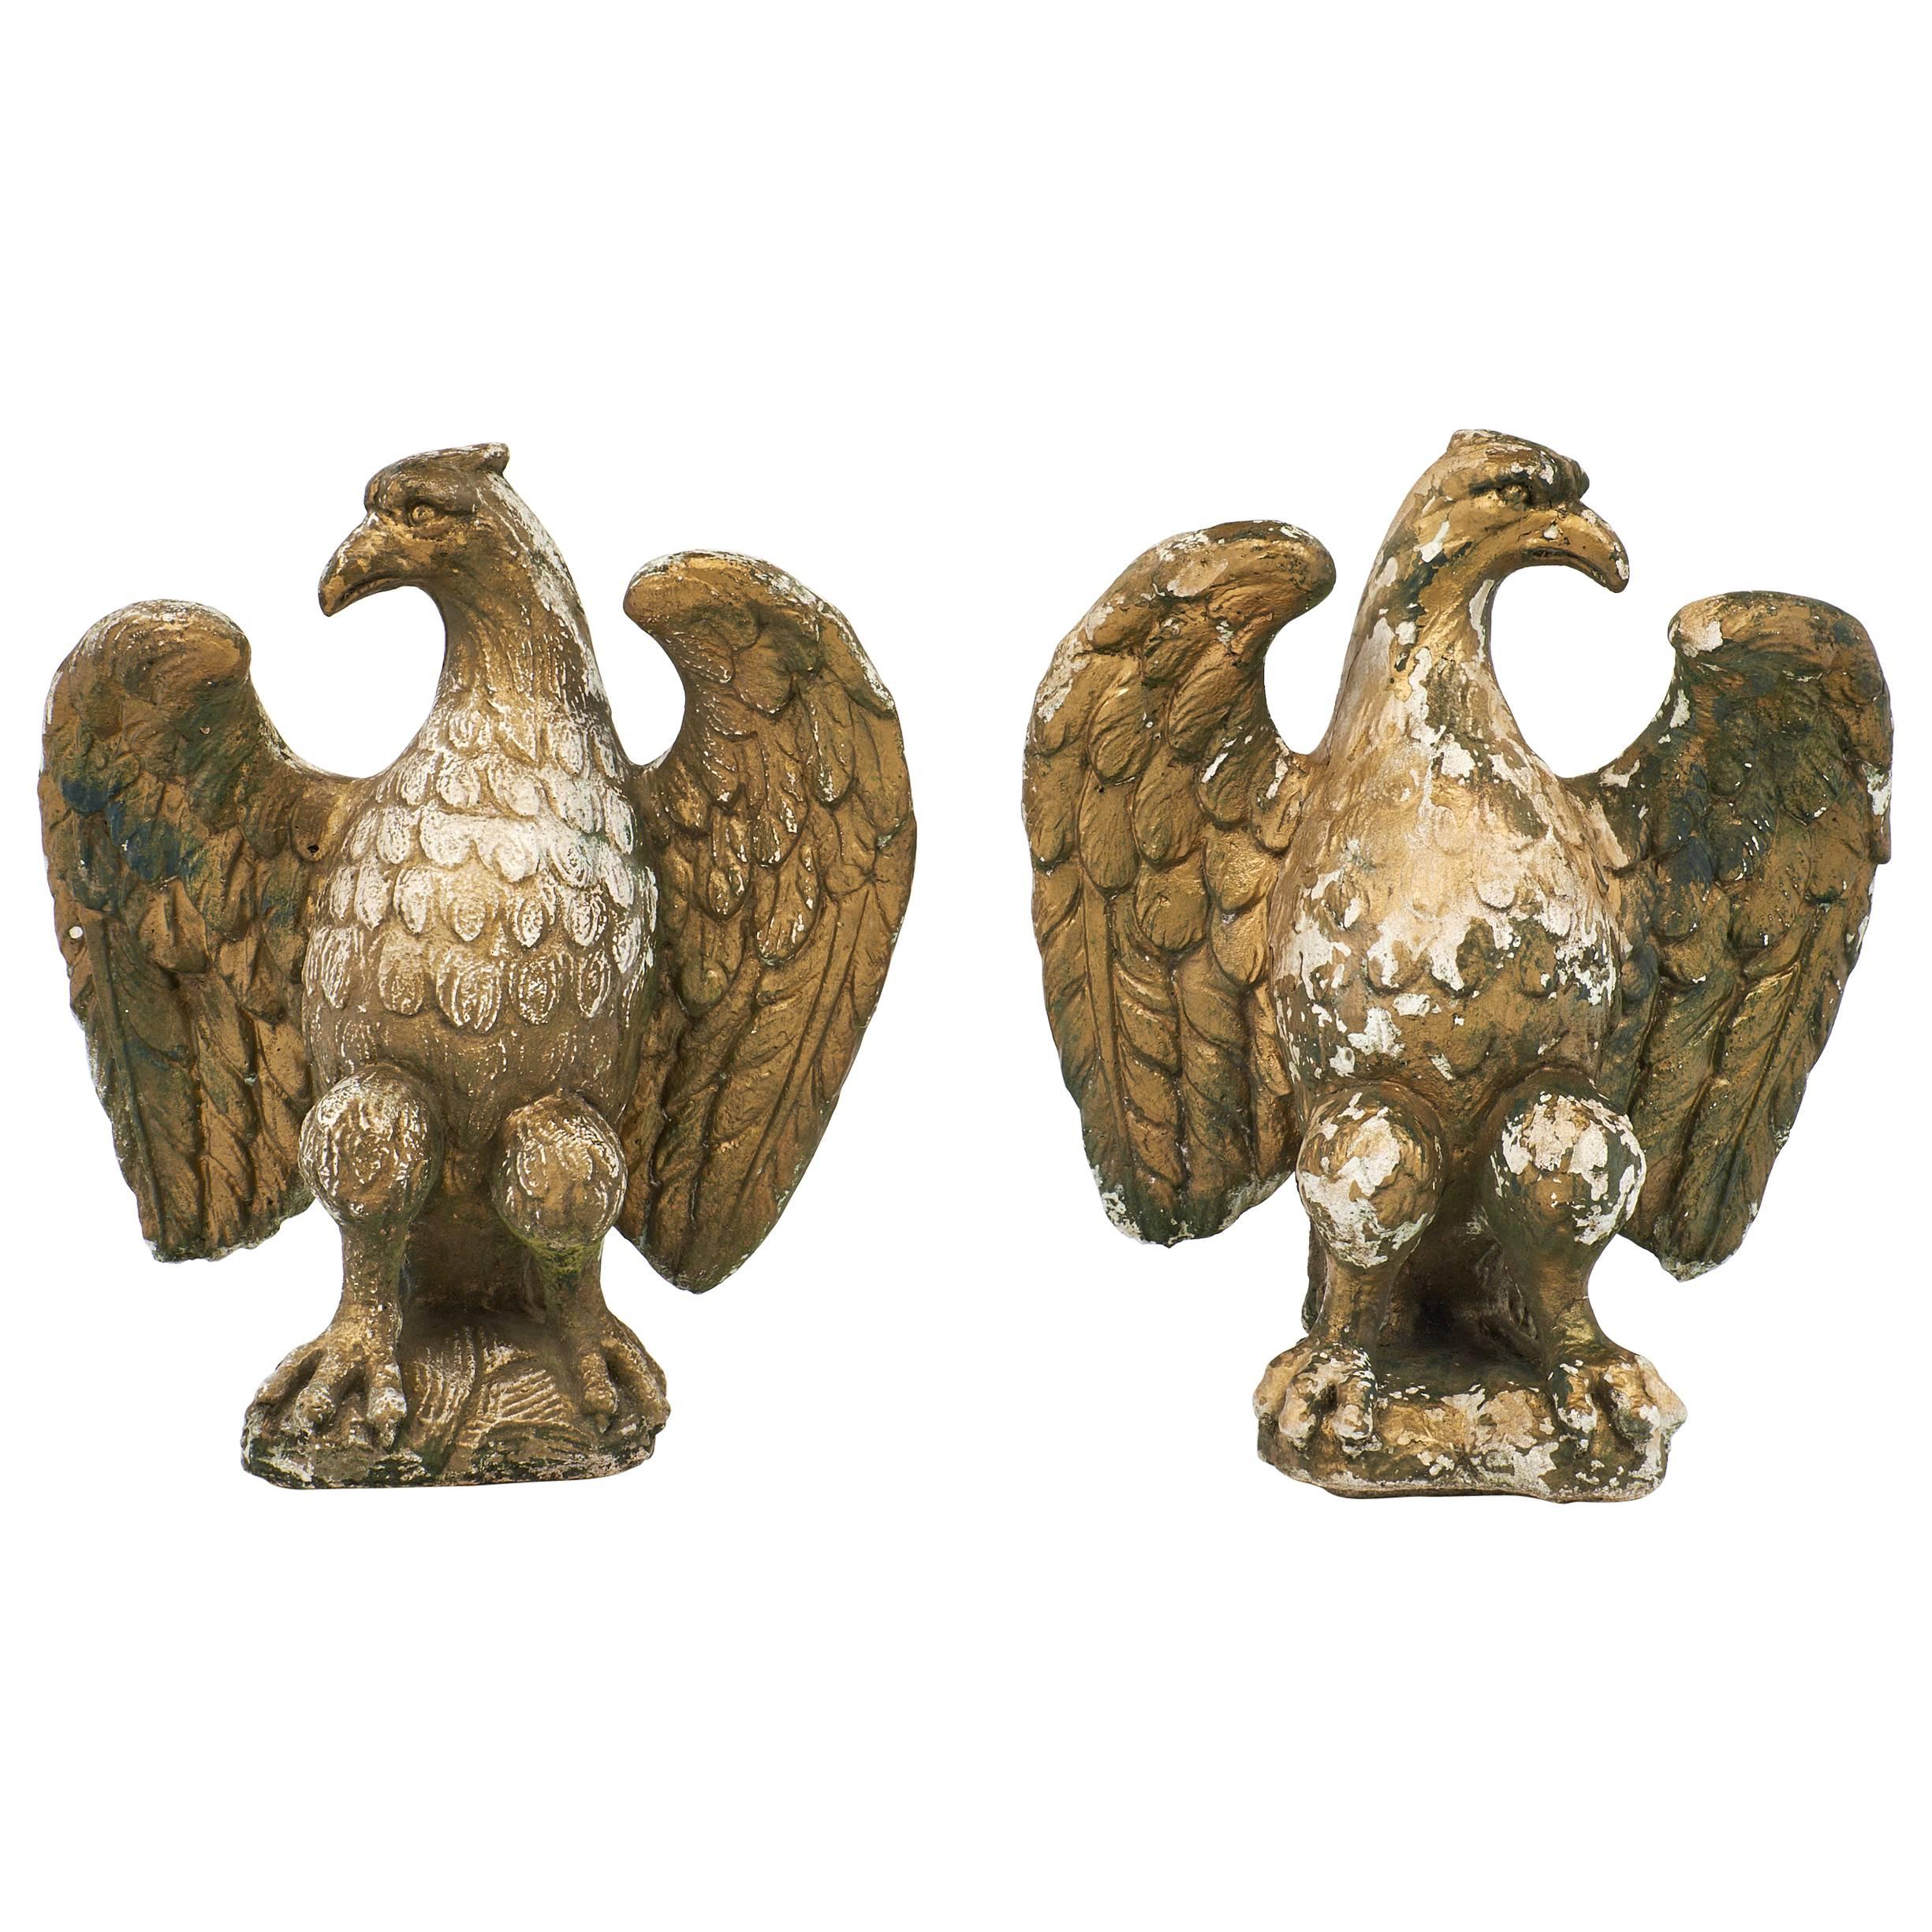 Pair of Vintage French Empire Stone Eagle Statues